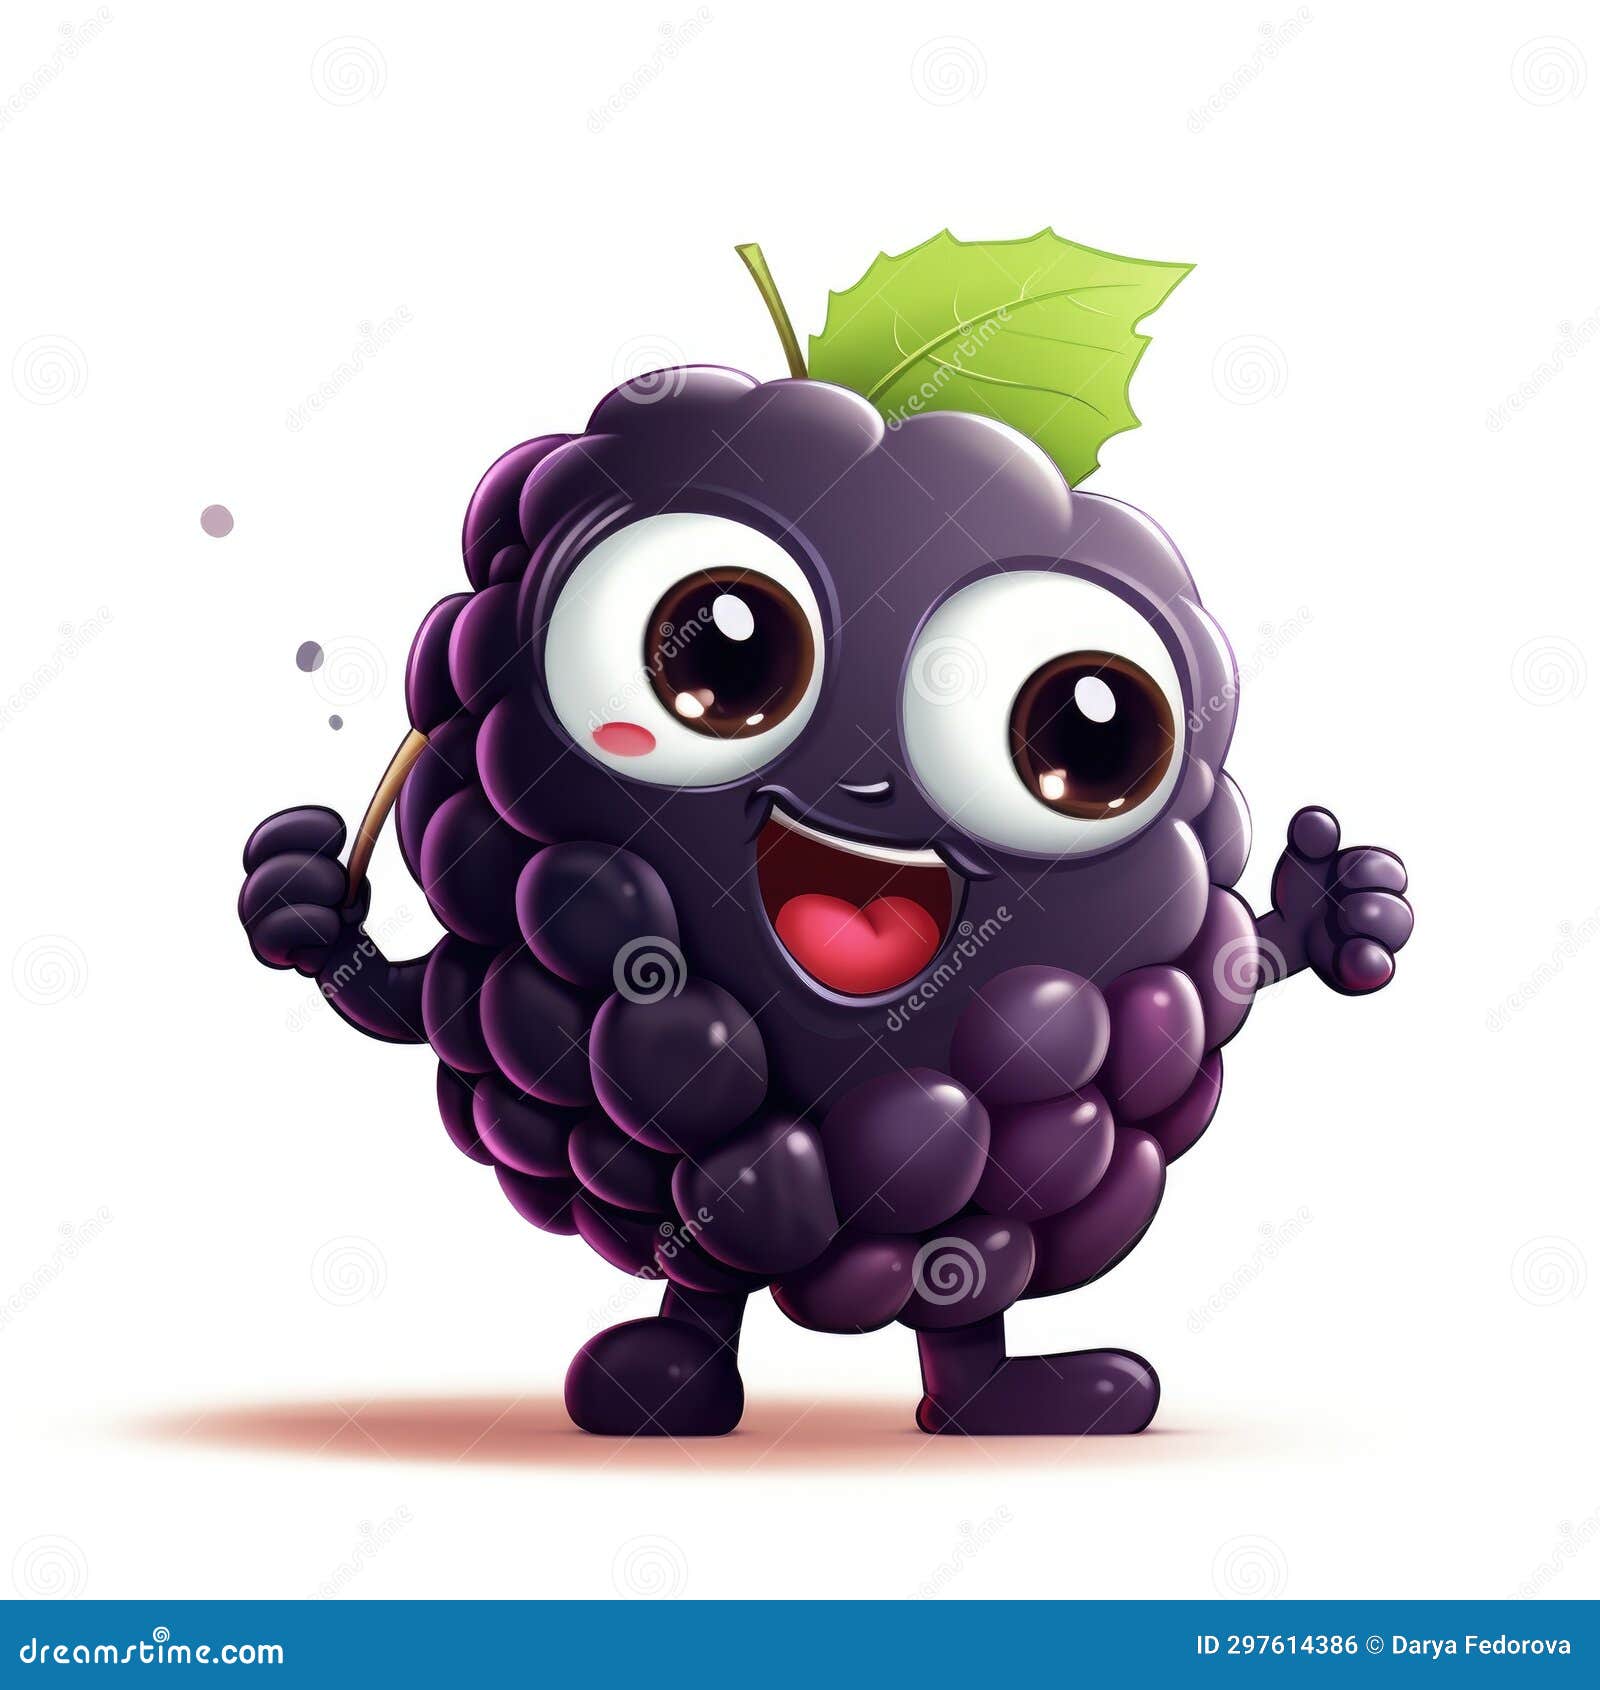 Cute Cartoon 3d Character Blackberry with Eyes on White Background ...